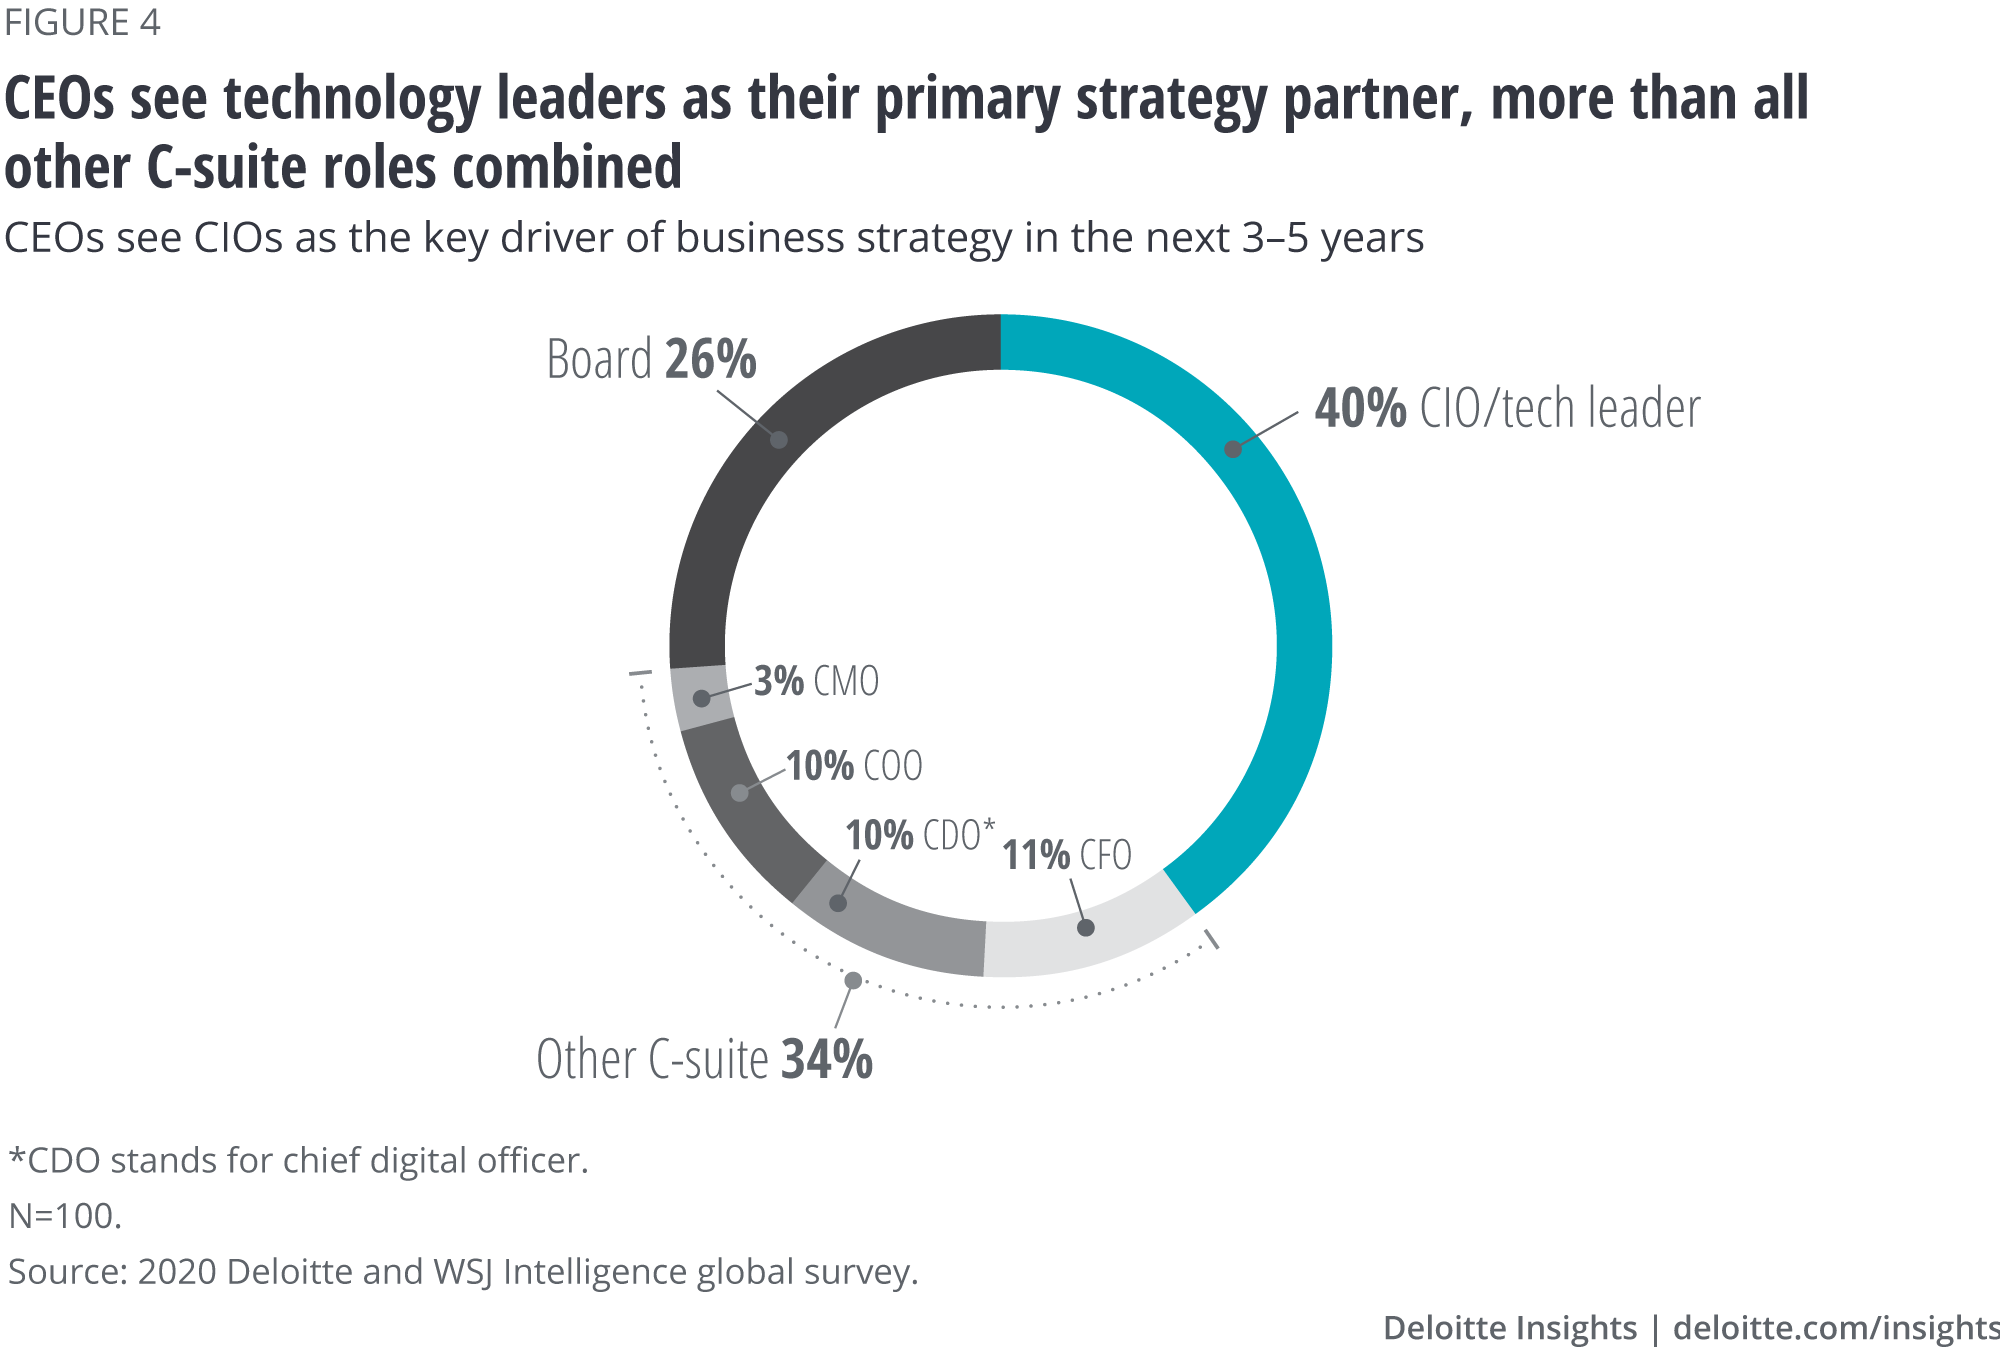 CEOs see technology leaders as their primary strategy partner, more than all other C-suite roles combined